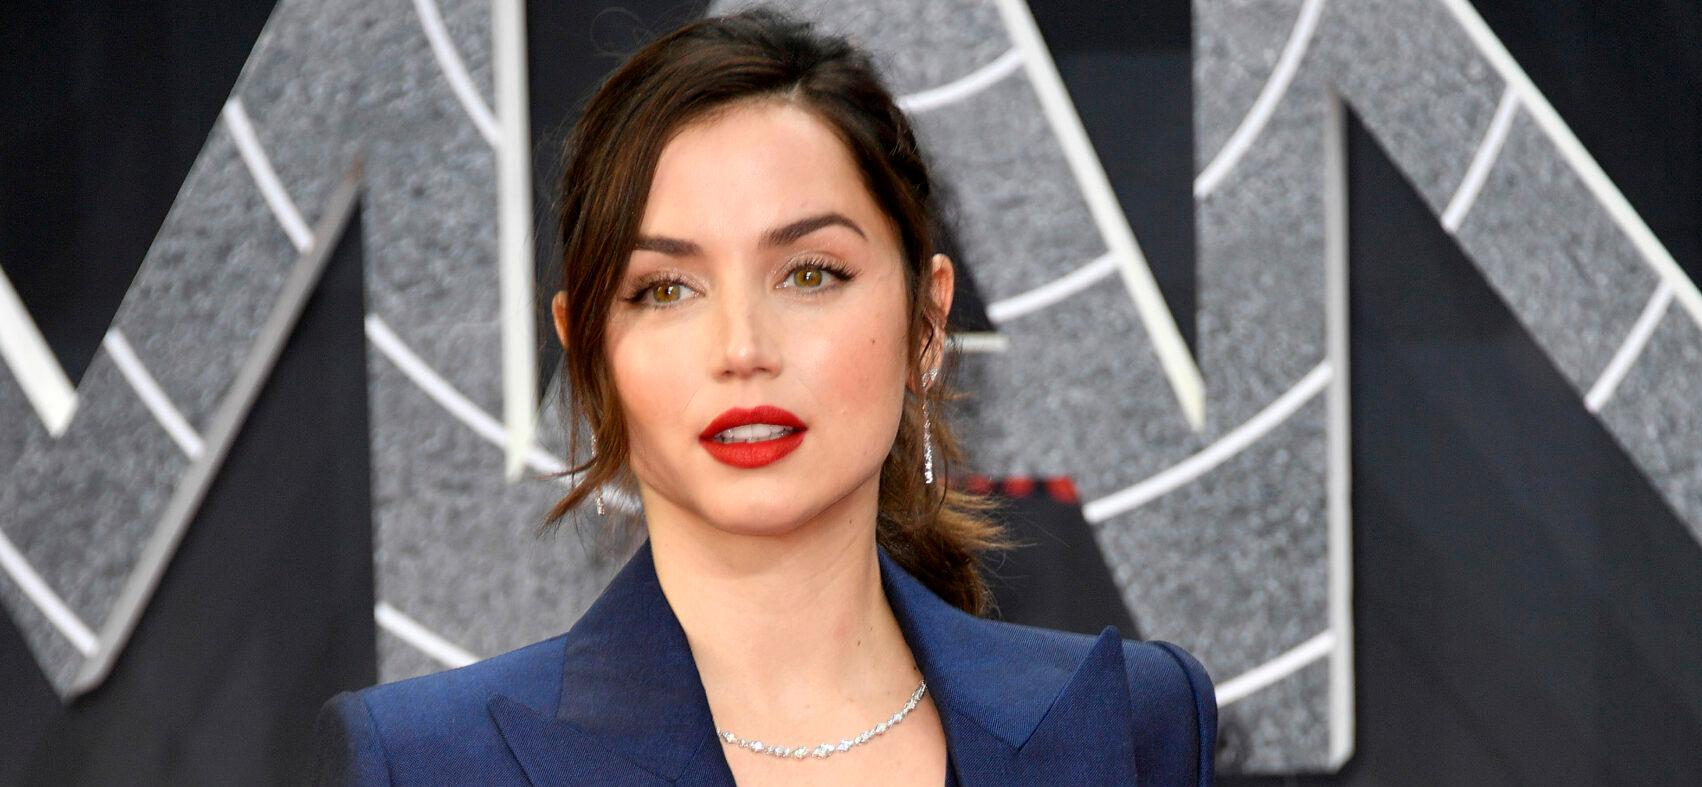 Ana de Armas Reveals She Learned To Speak English By Watching THIS Popular Comedy Series